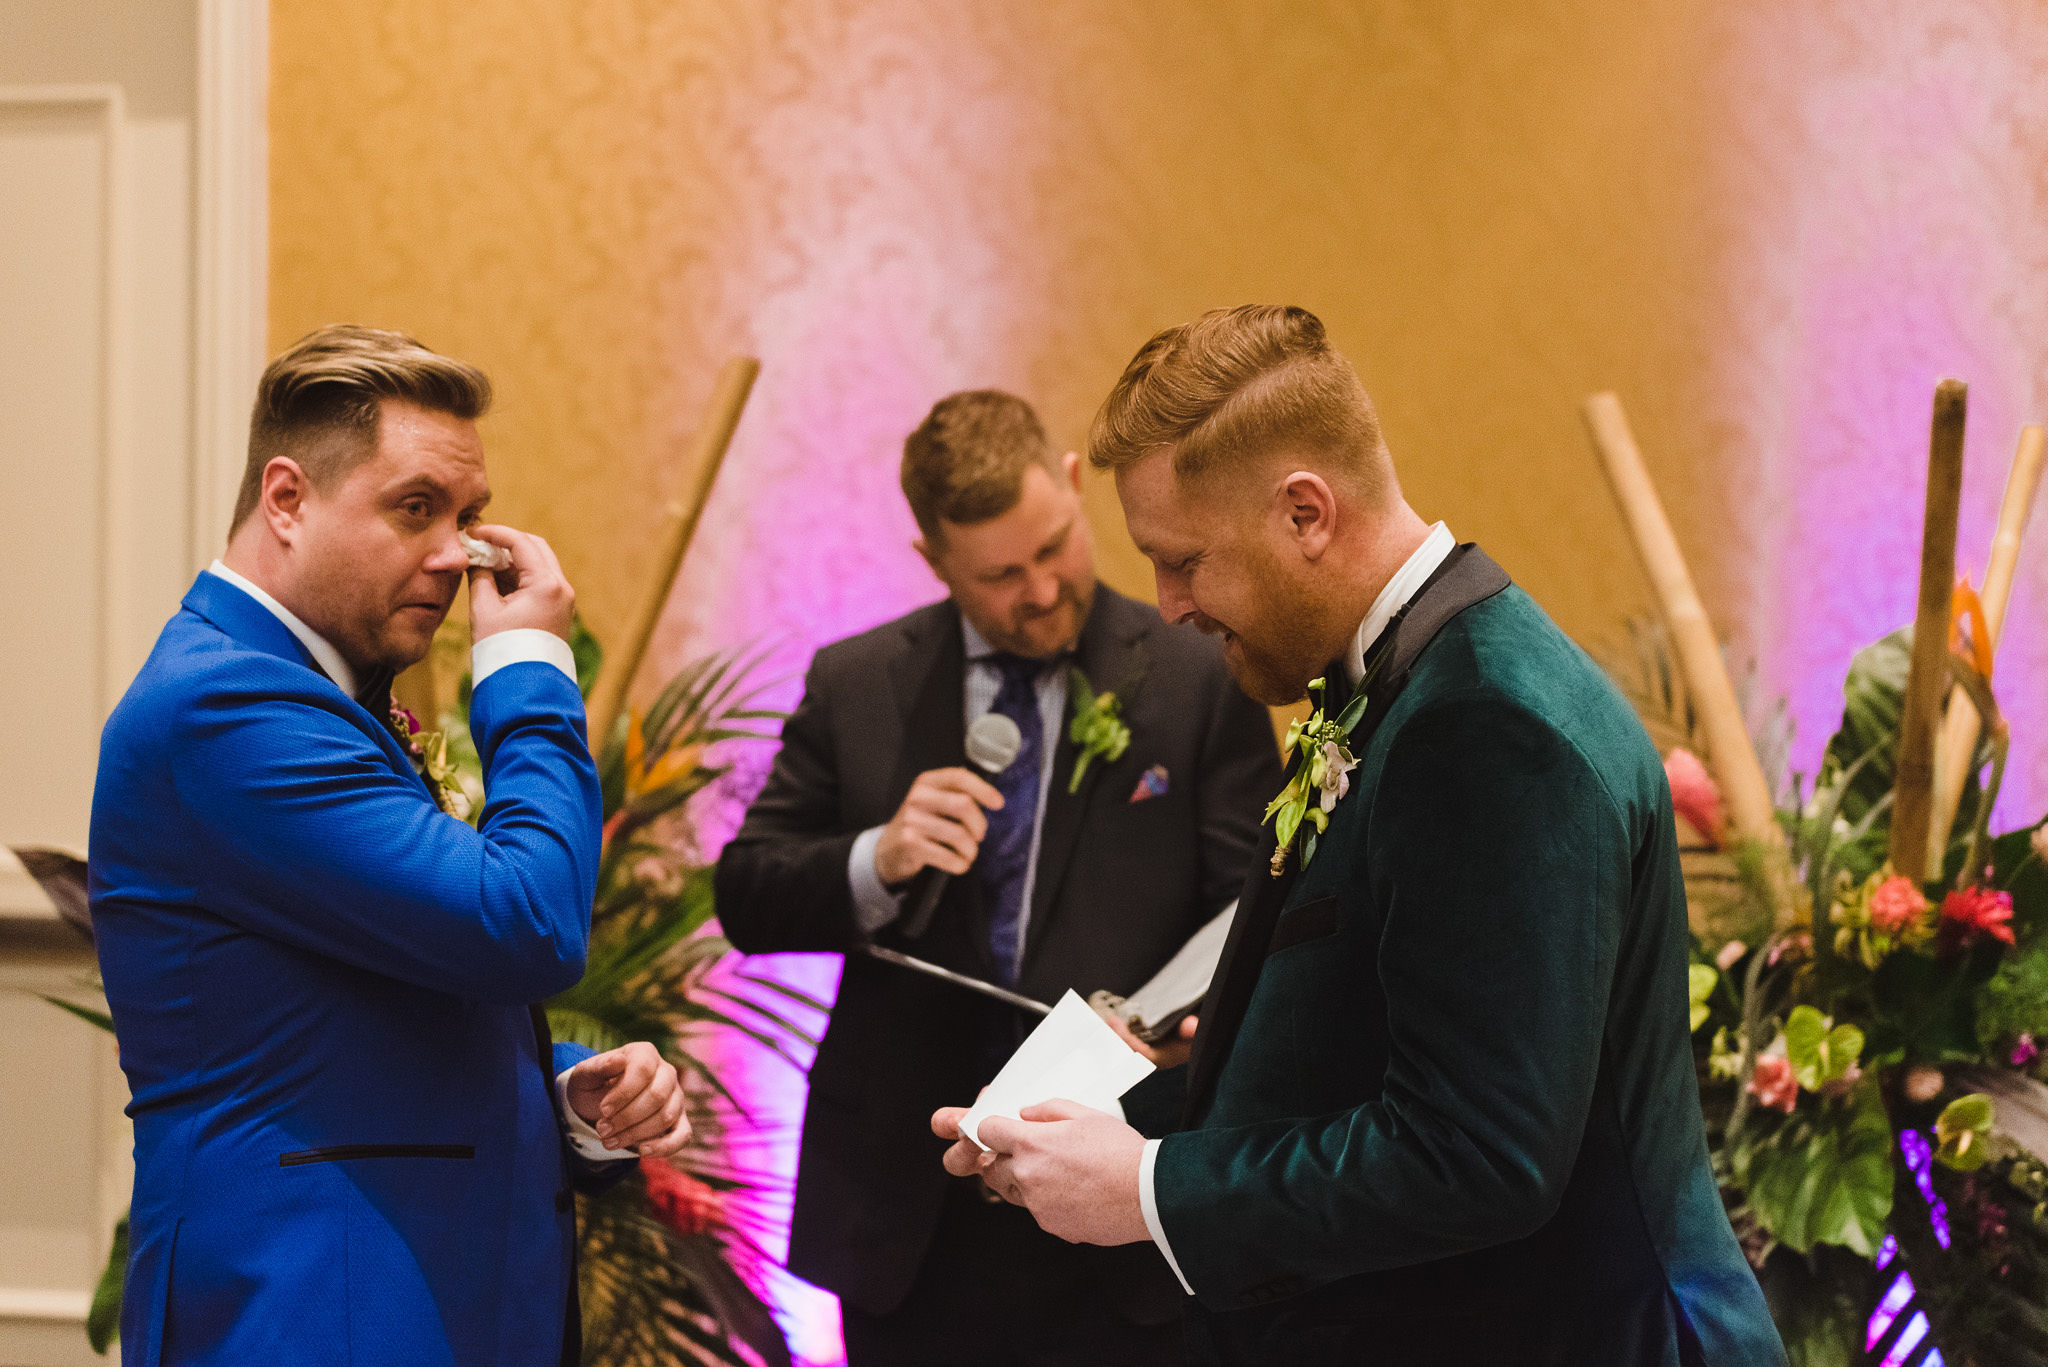 groom in bright blue suit wiping tears from his eyes while his groom reads vows during wedding ceremony at the Hilton Fallsview in Niagara Falls